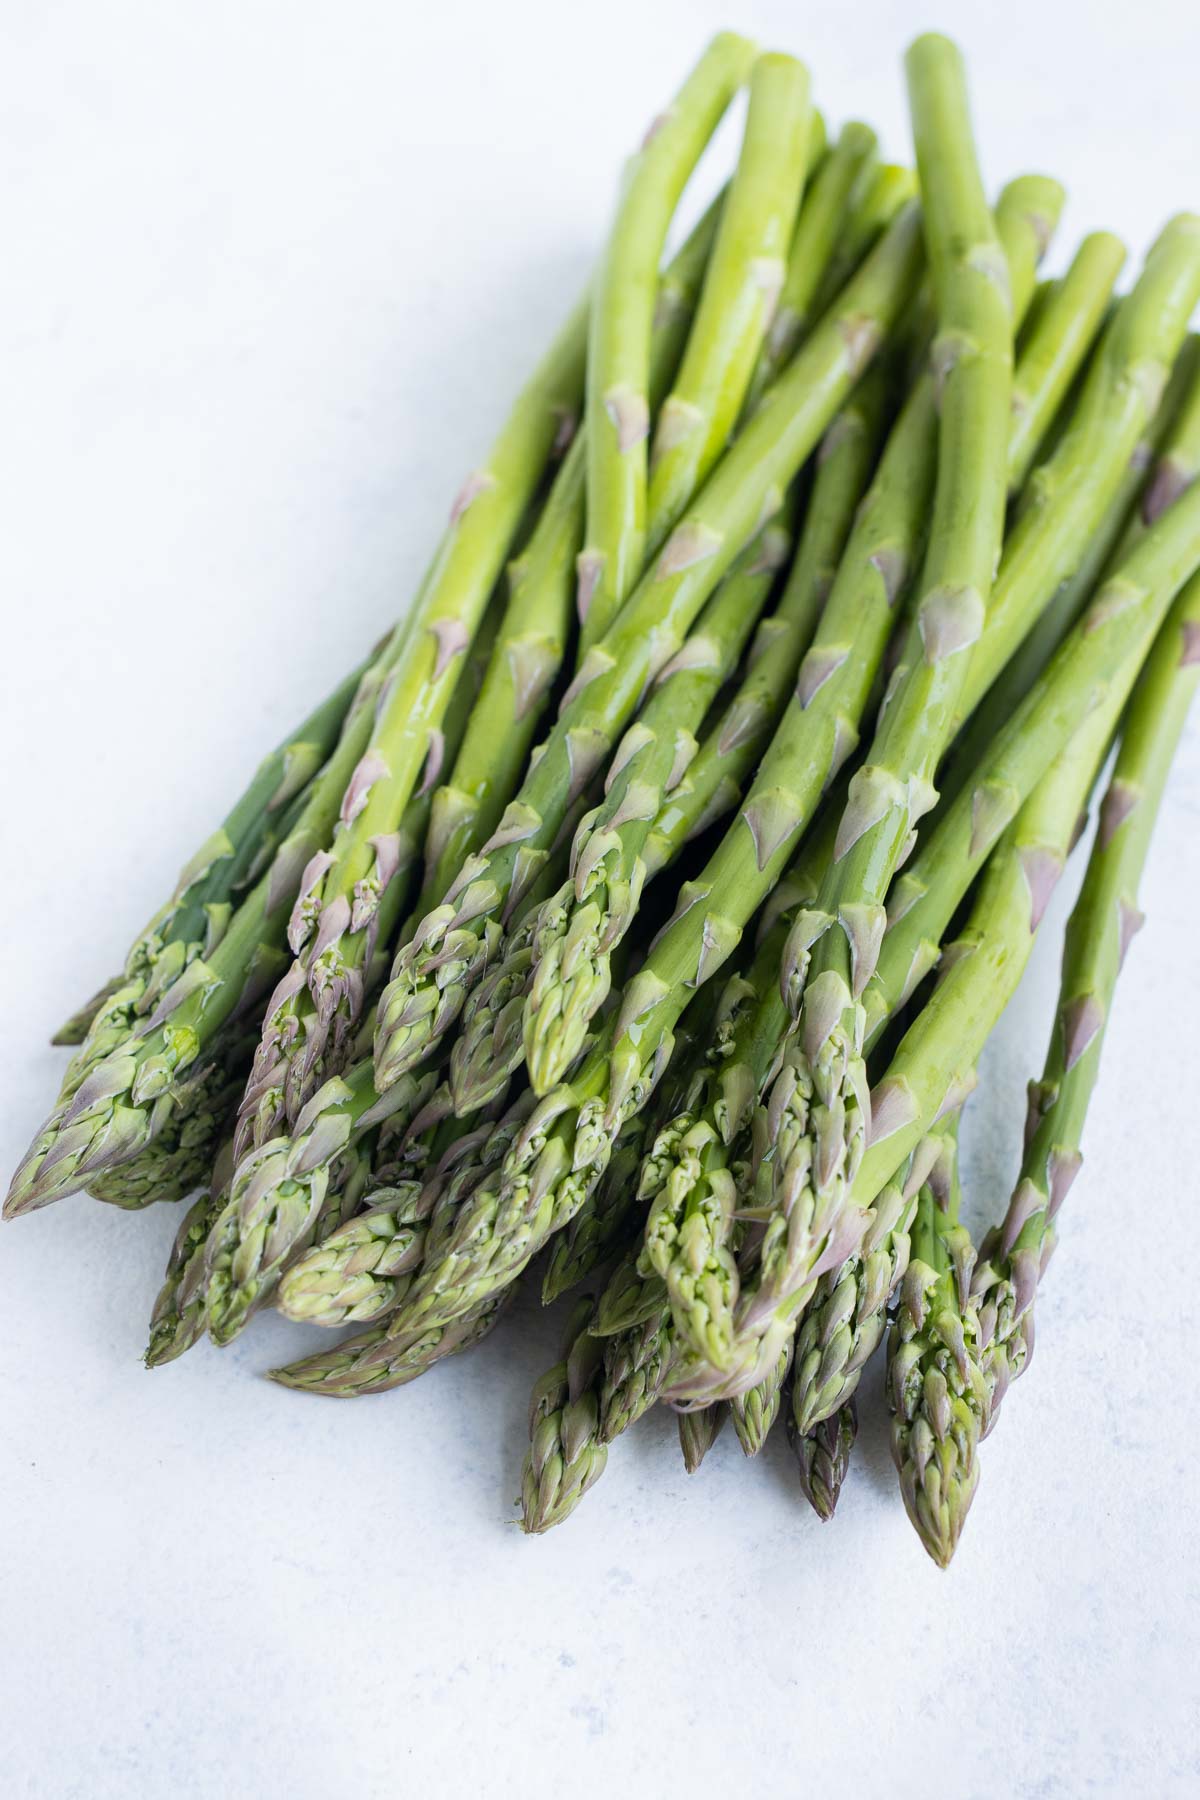 Asparagus lined up on a countertop.